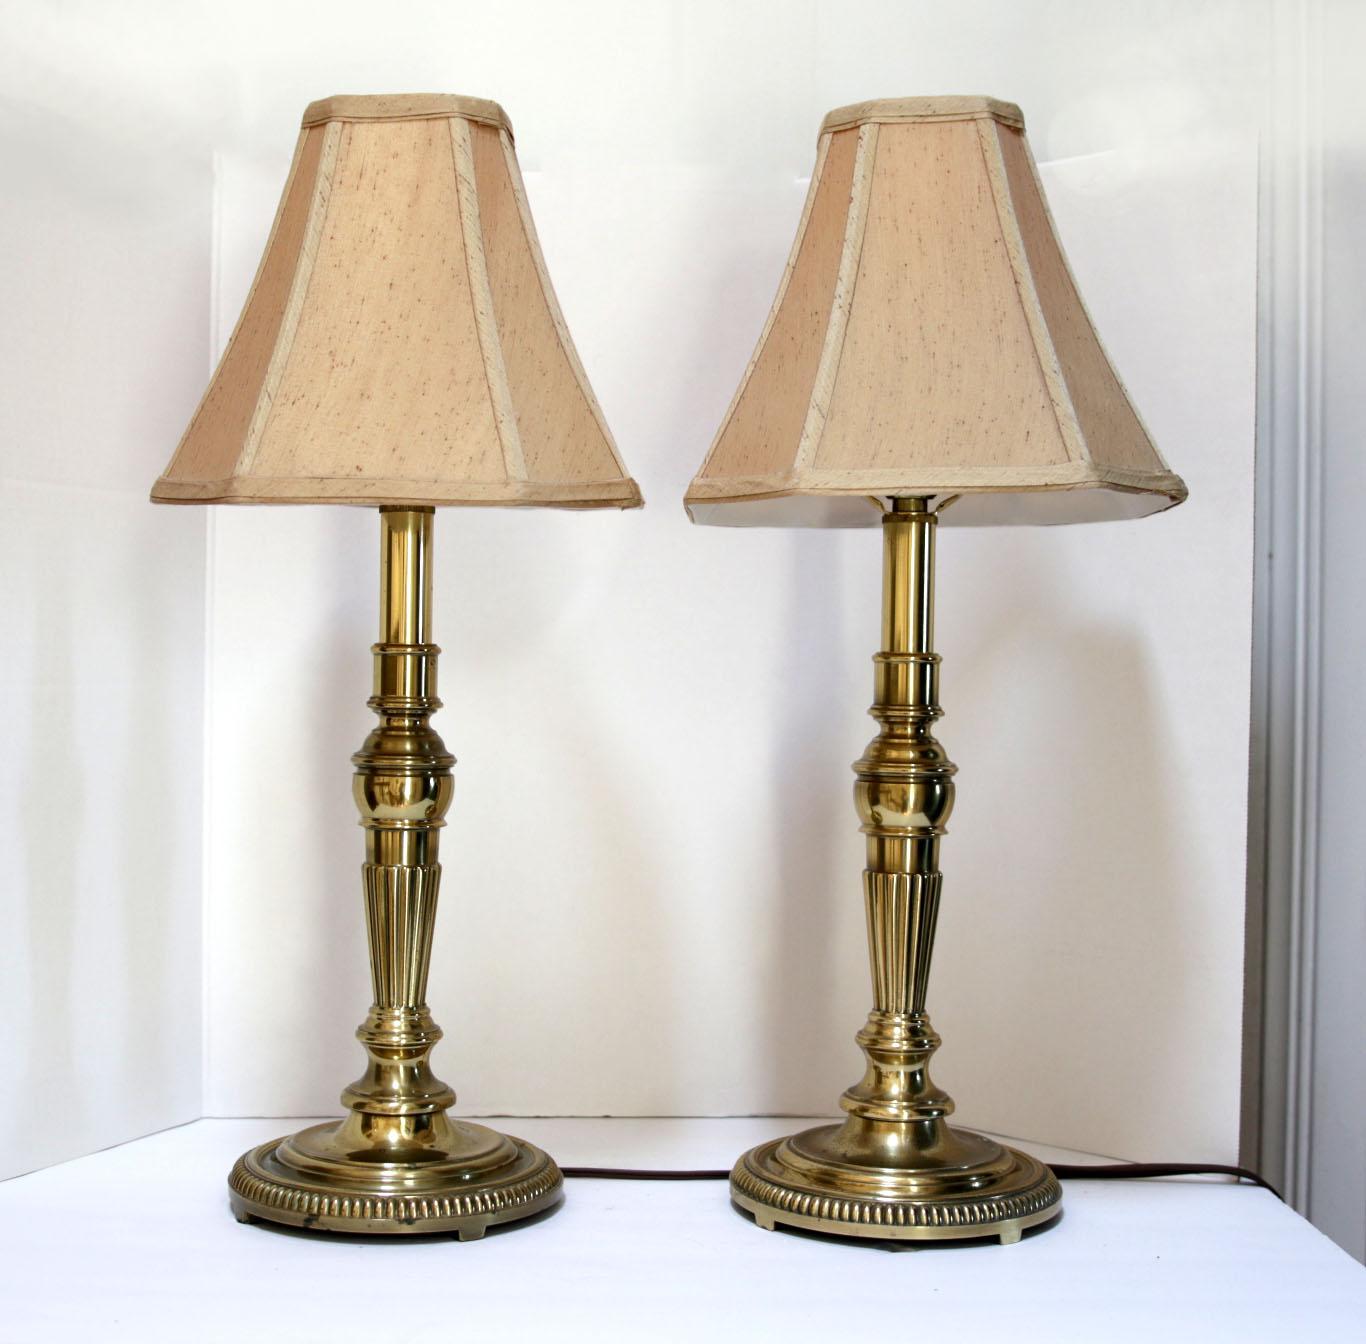 Stiffel craftsmanship and style make this pair of buffet or console table lamps a design tour de force. Form meets function in this pair. They are lovely and will light the way on a console table or a splendid buffet presentation. The lamps have a